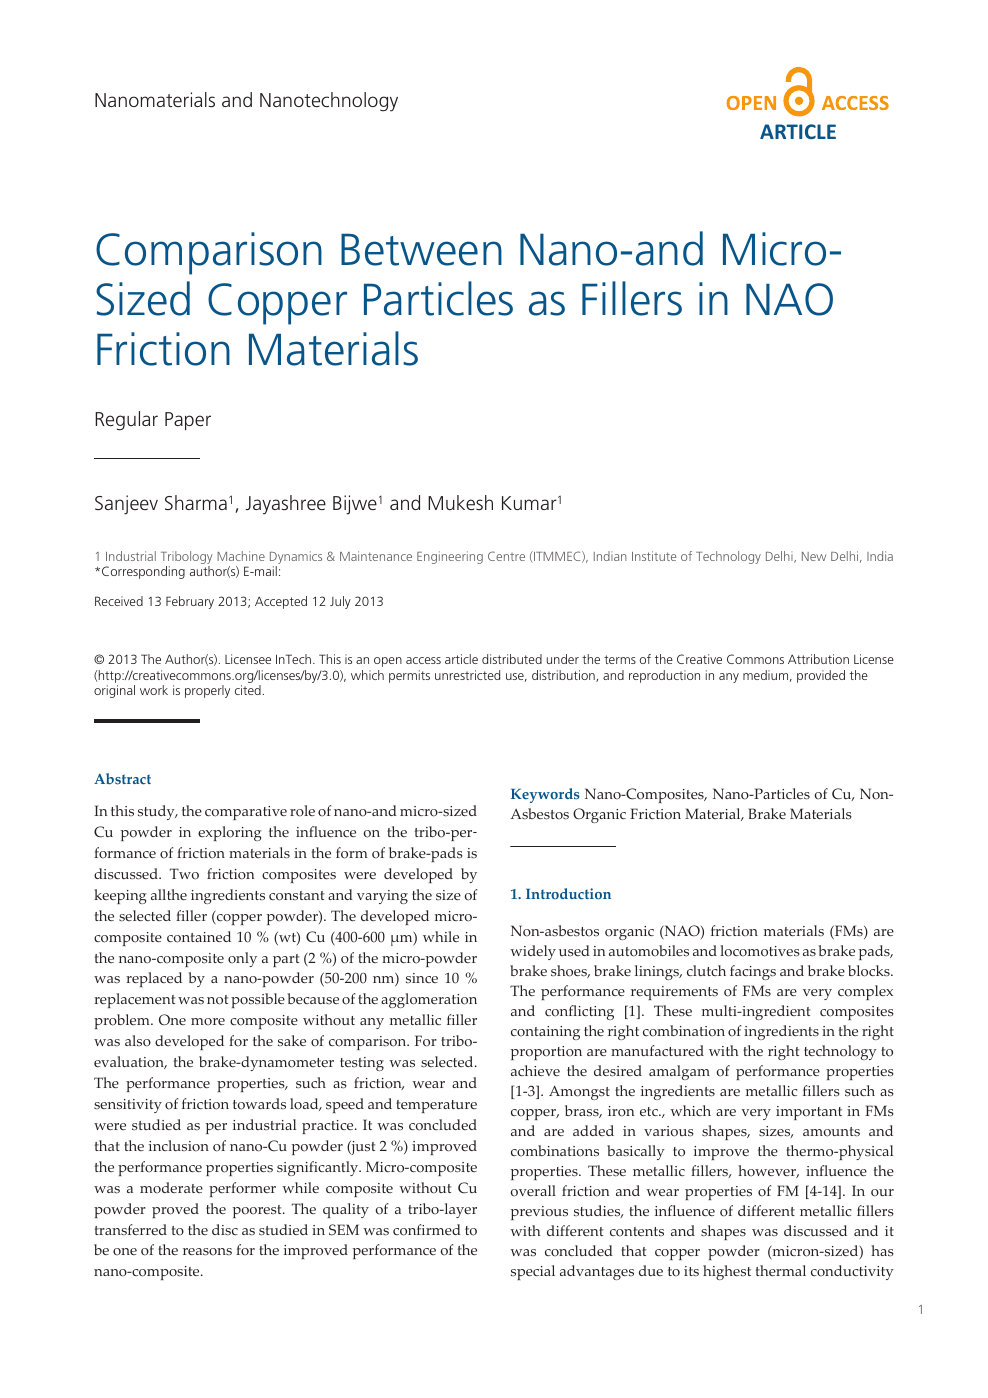 Differences and similarities between nano-, micro-and macroscale